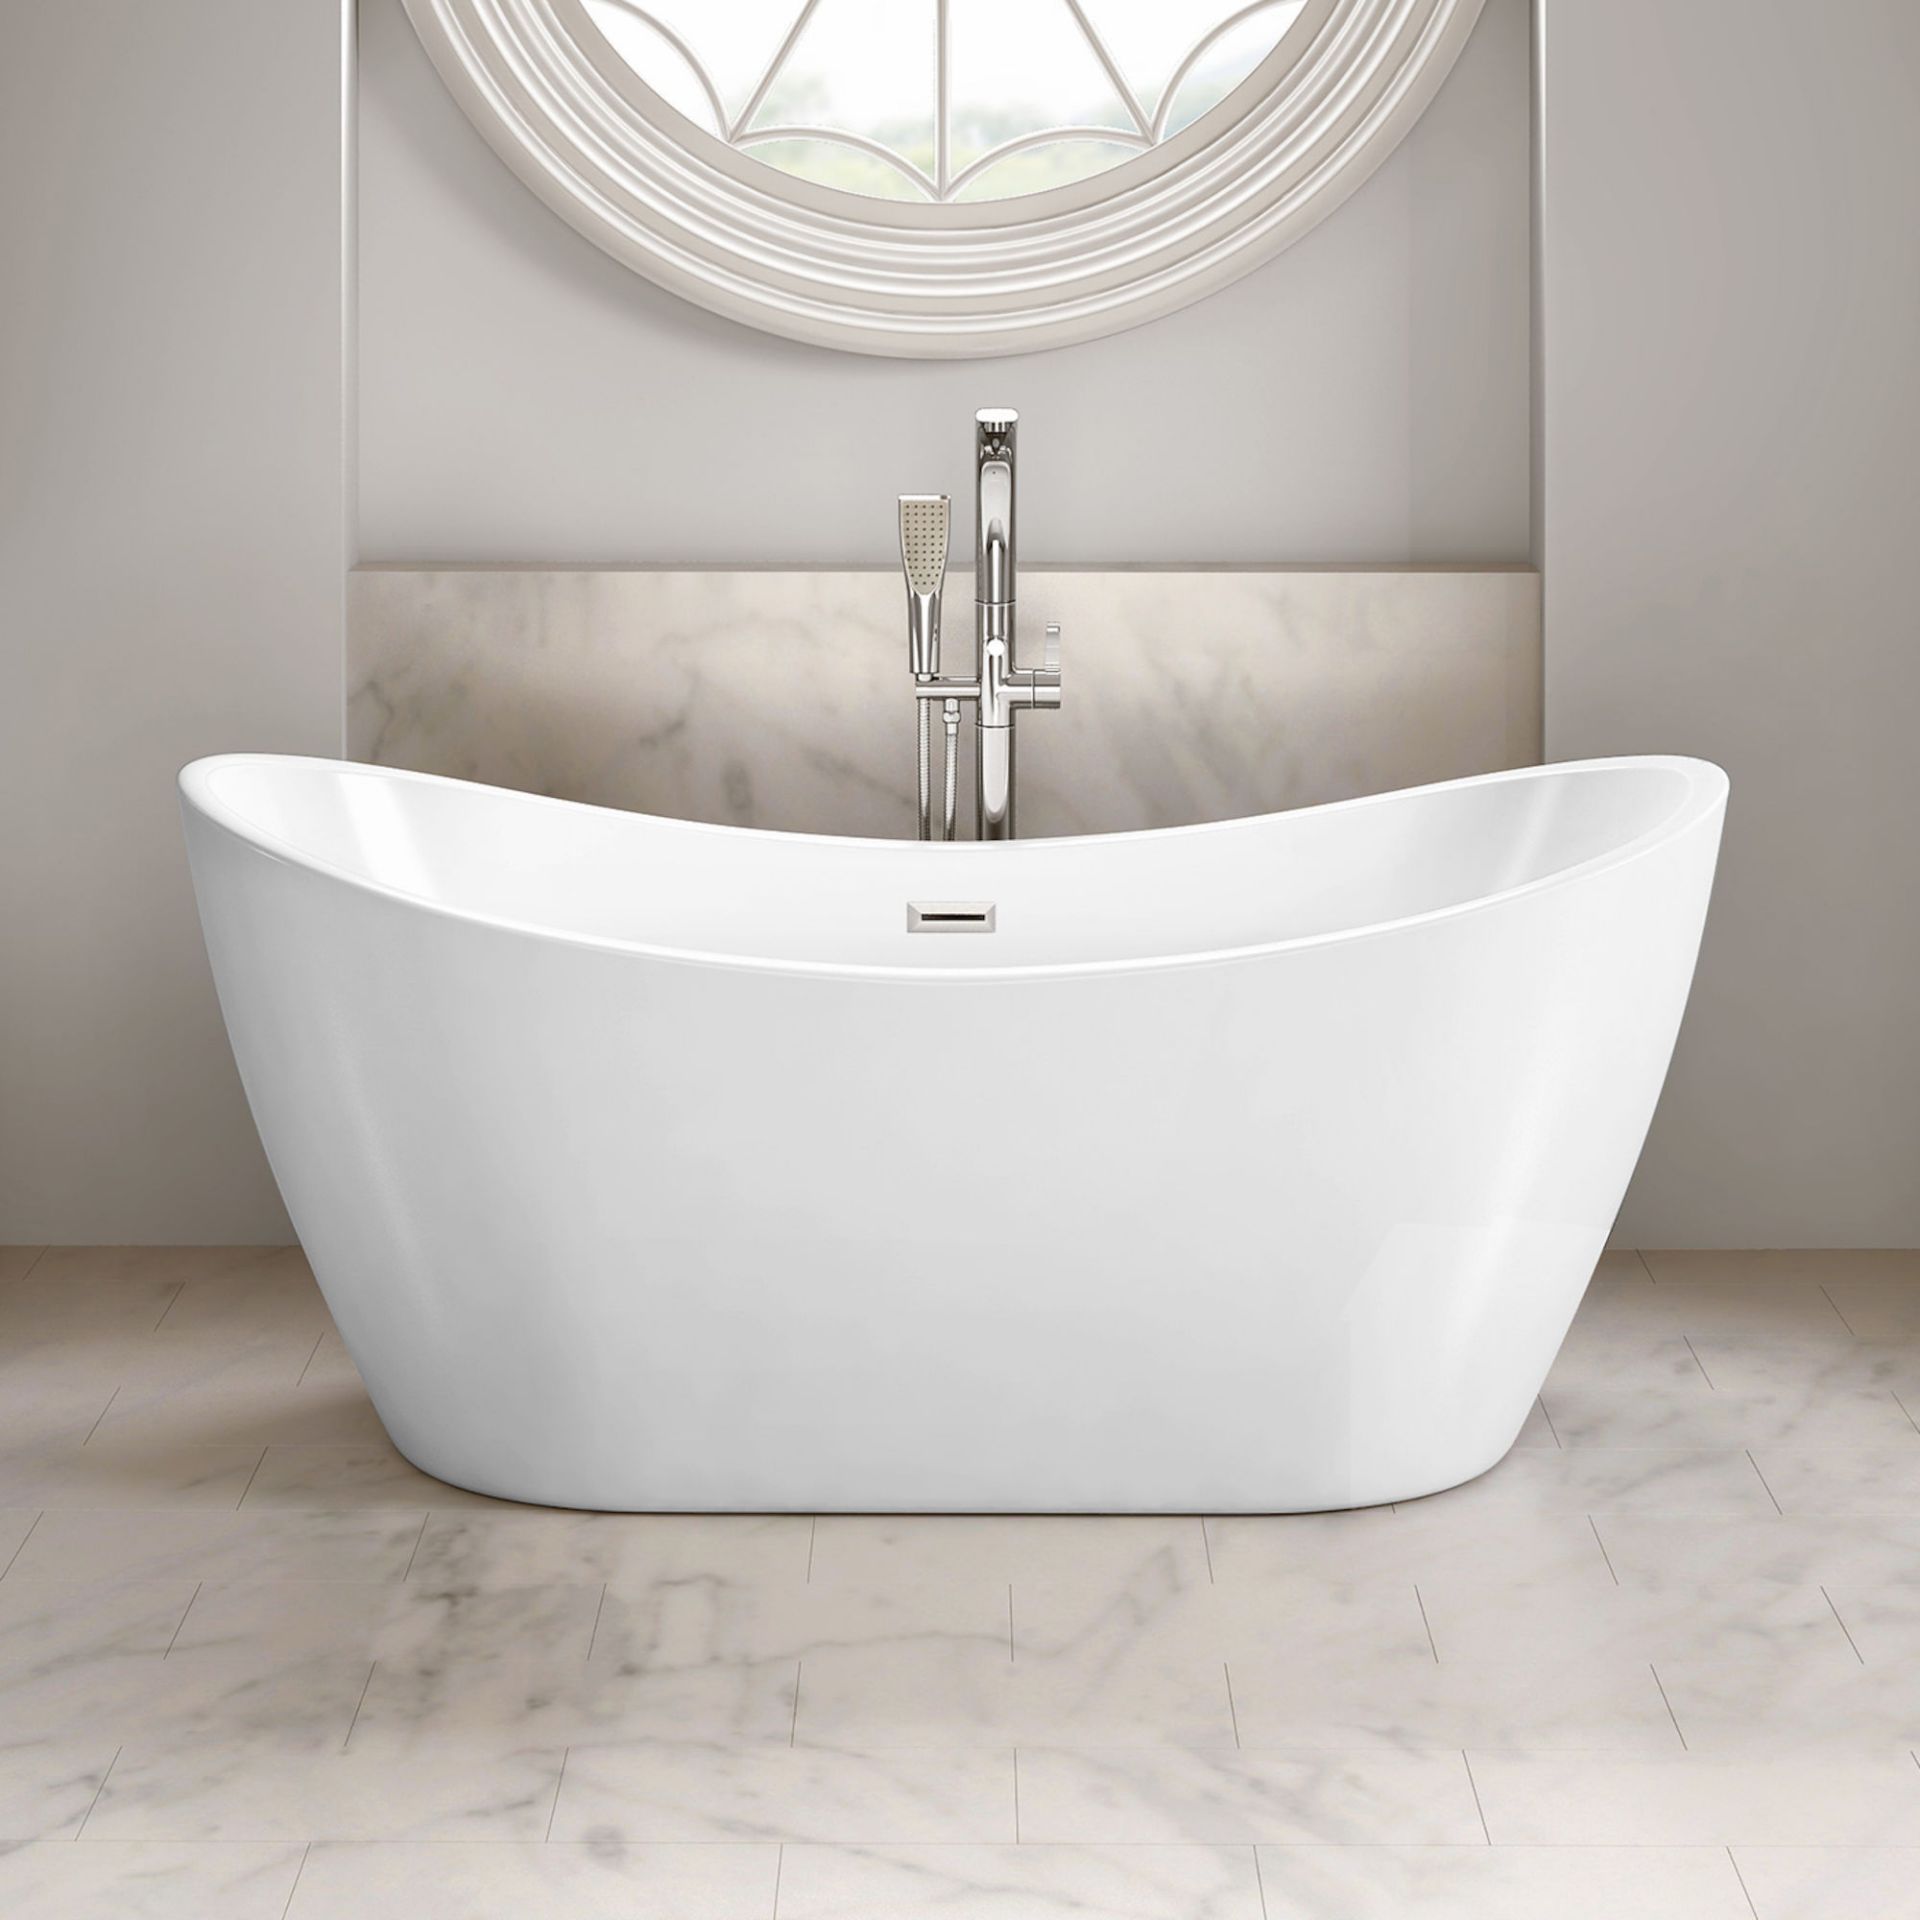 NEW (M1) 1700mmx780mm Belmont Freestanding Bath. RRP £2,999. Visually simplistic to suit any b... - Image 3 of 3